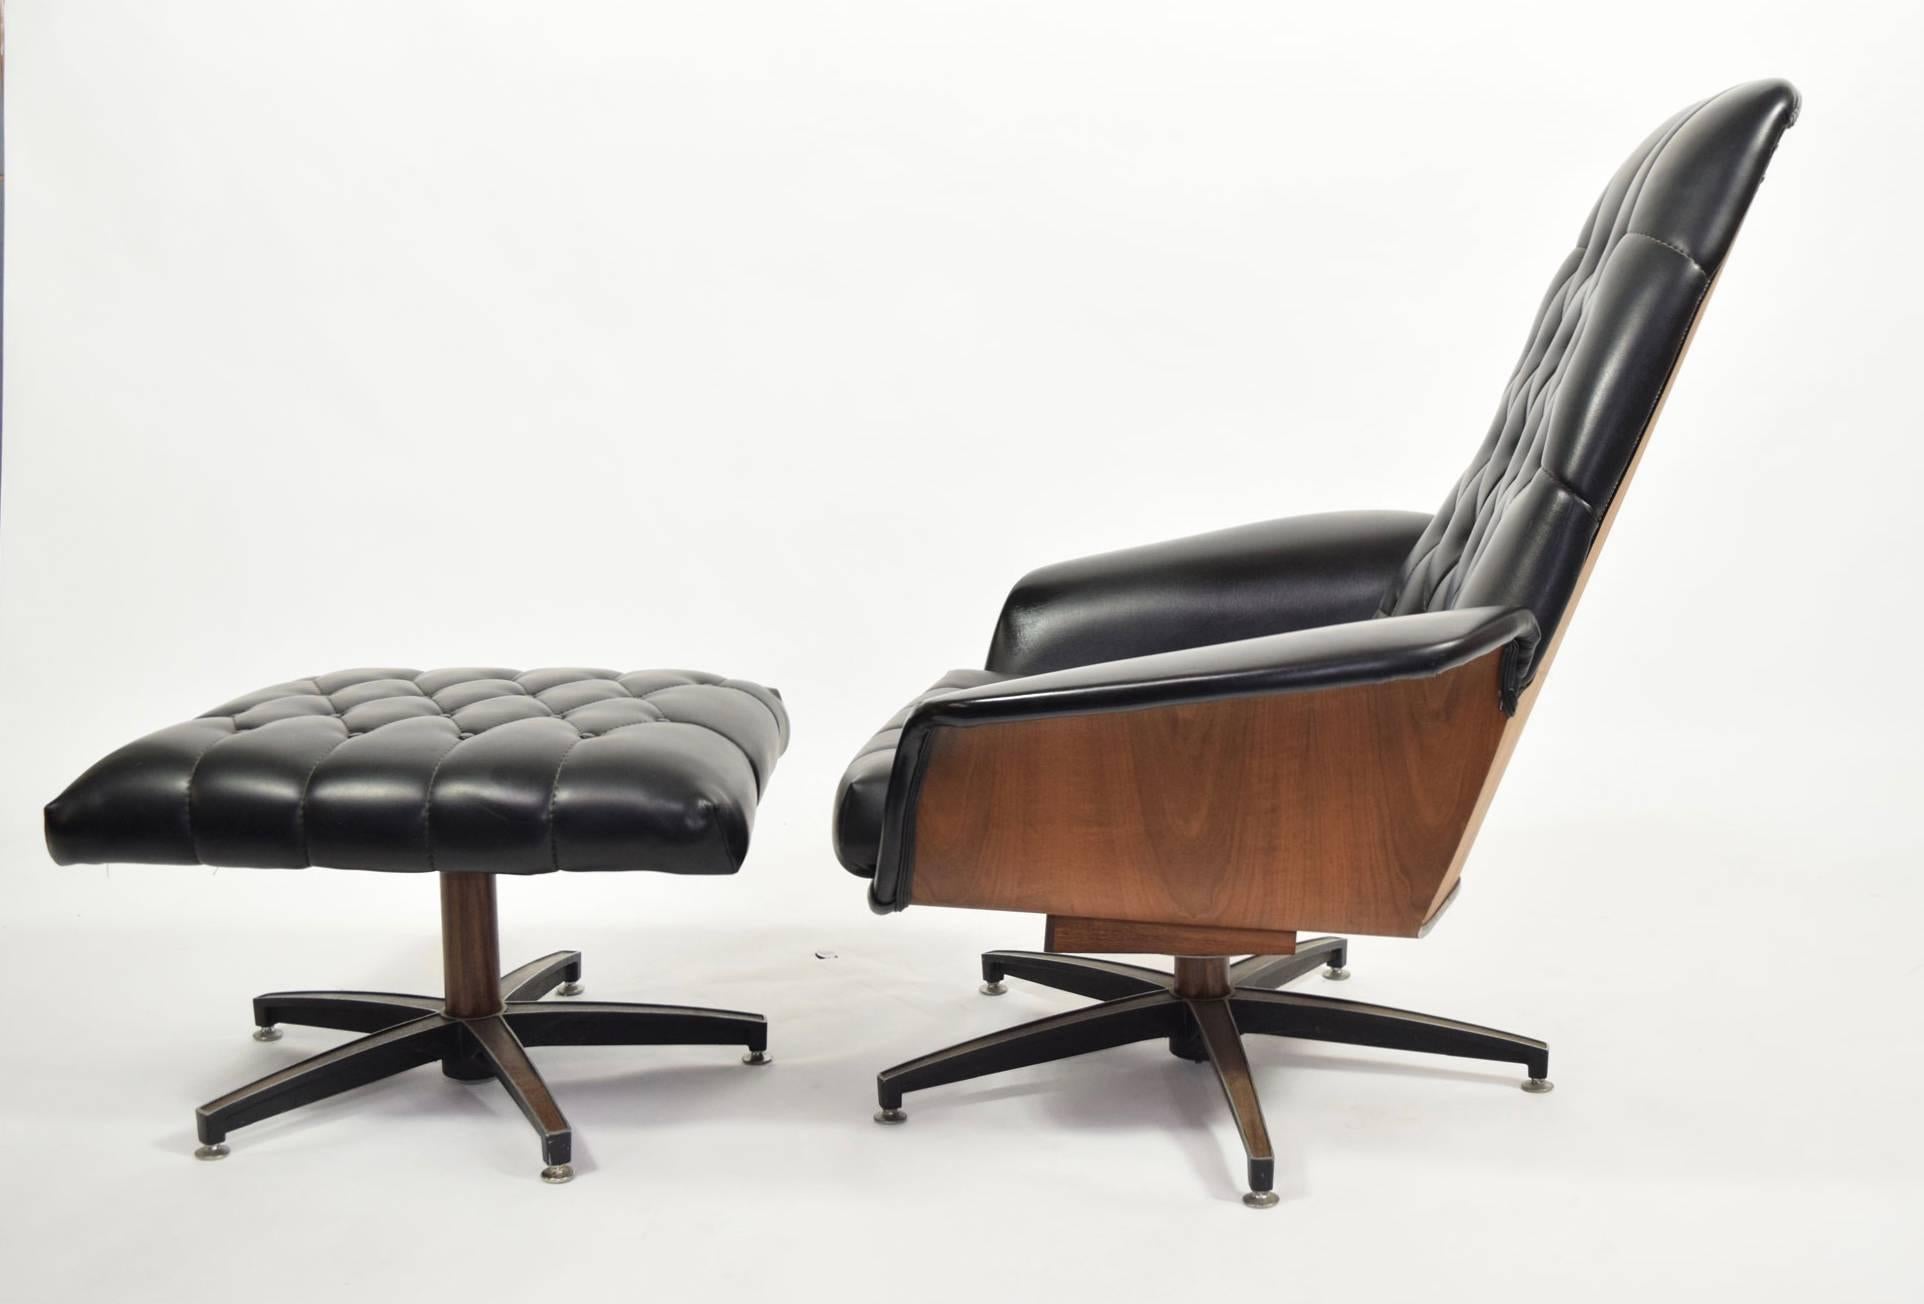 Great looking Mid-century modern leather chair and ottoman. Barely used. Chairs rocks and swivels.